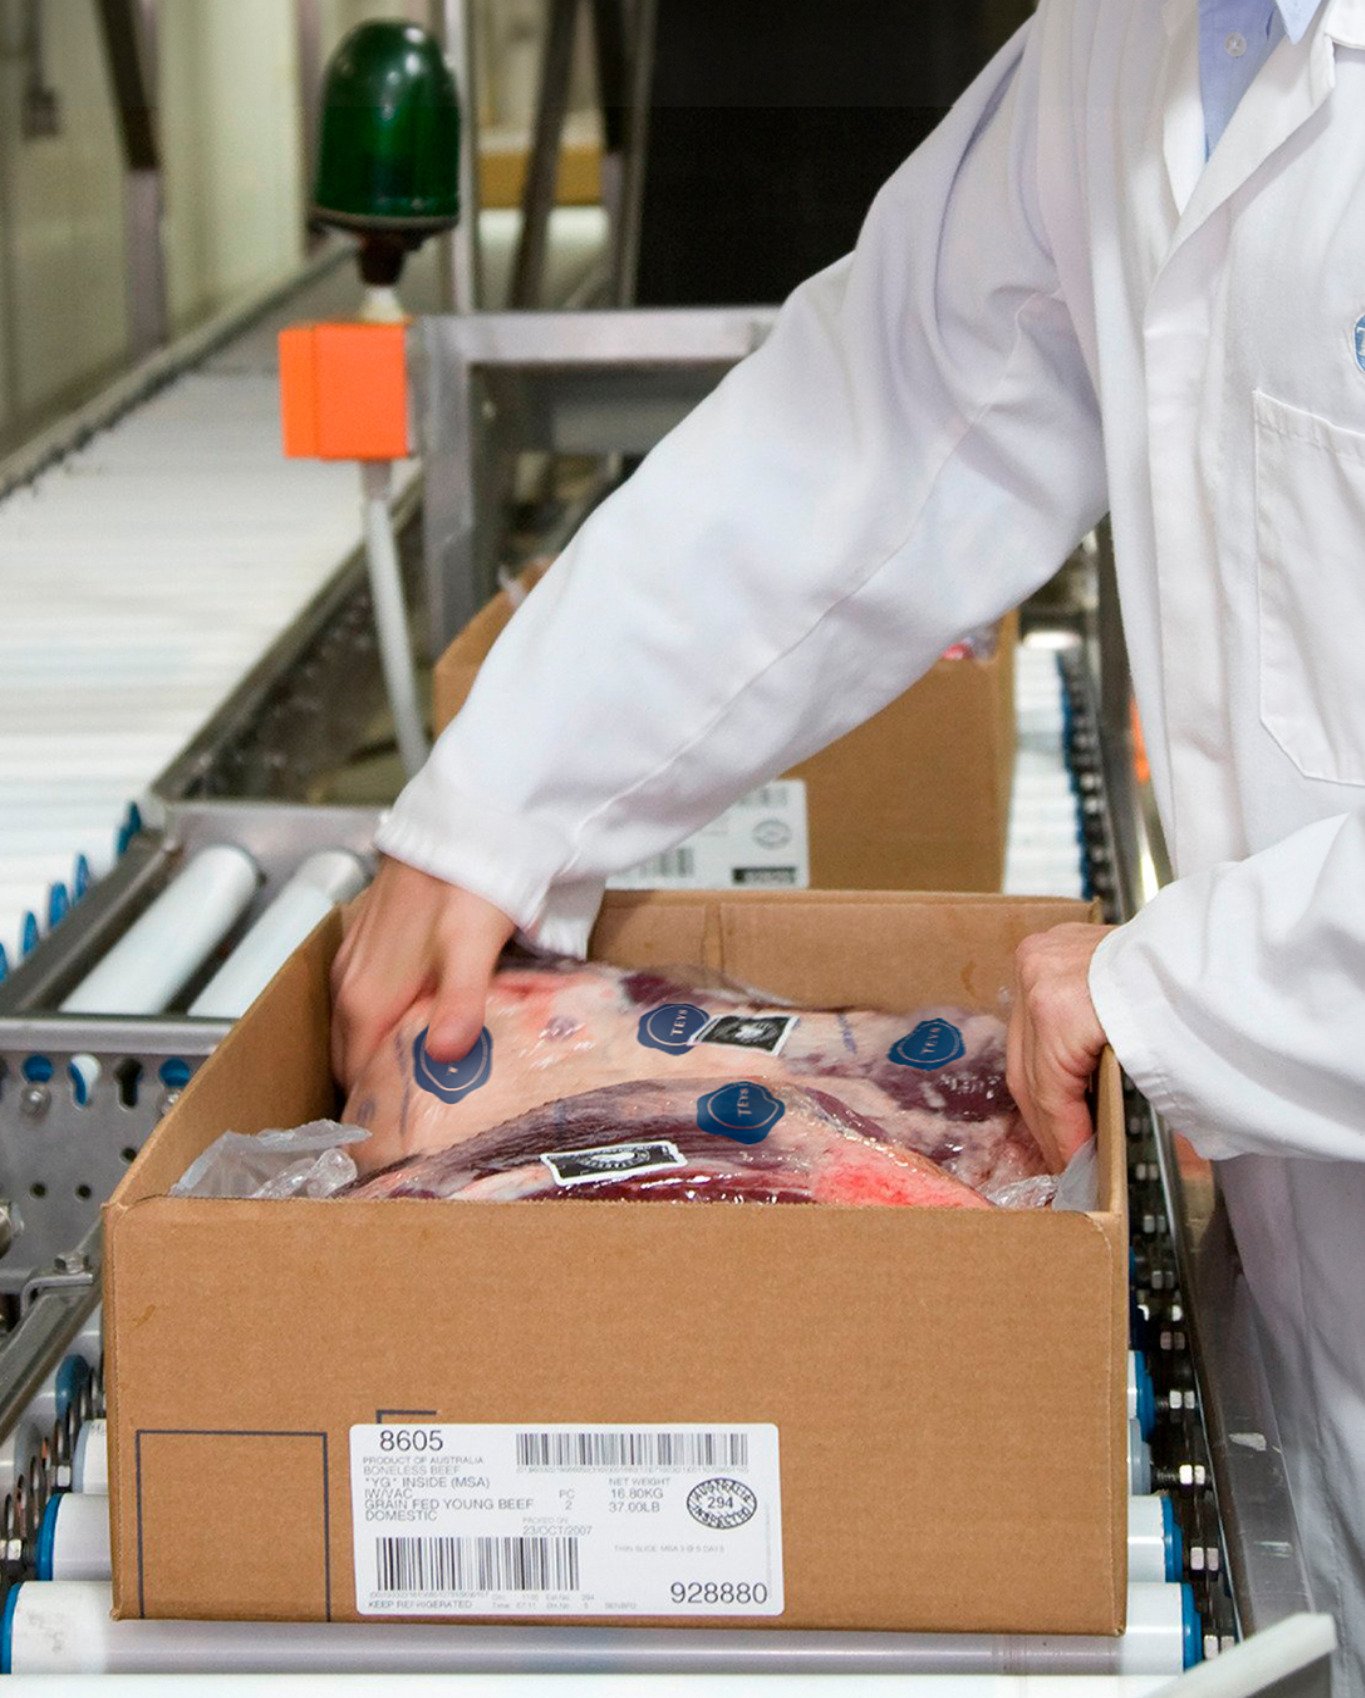 A worker packs meat product into a box